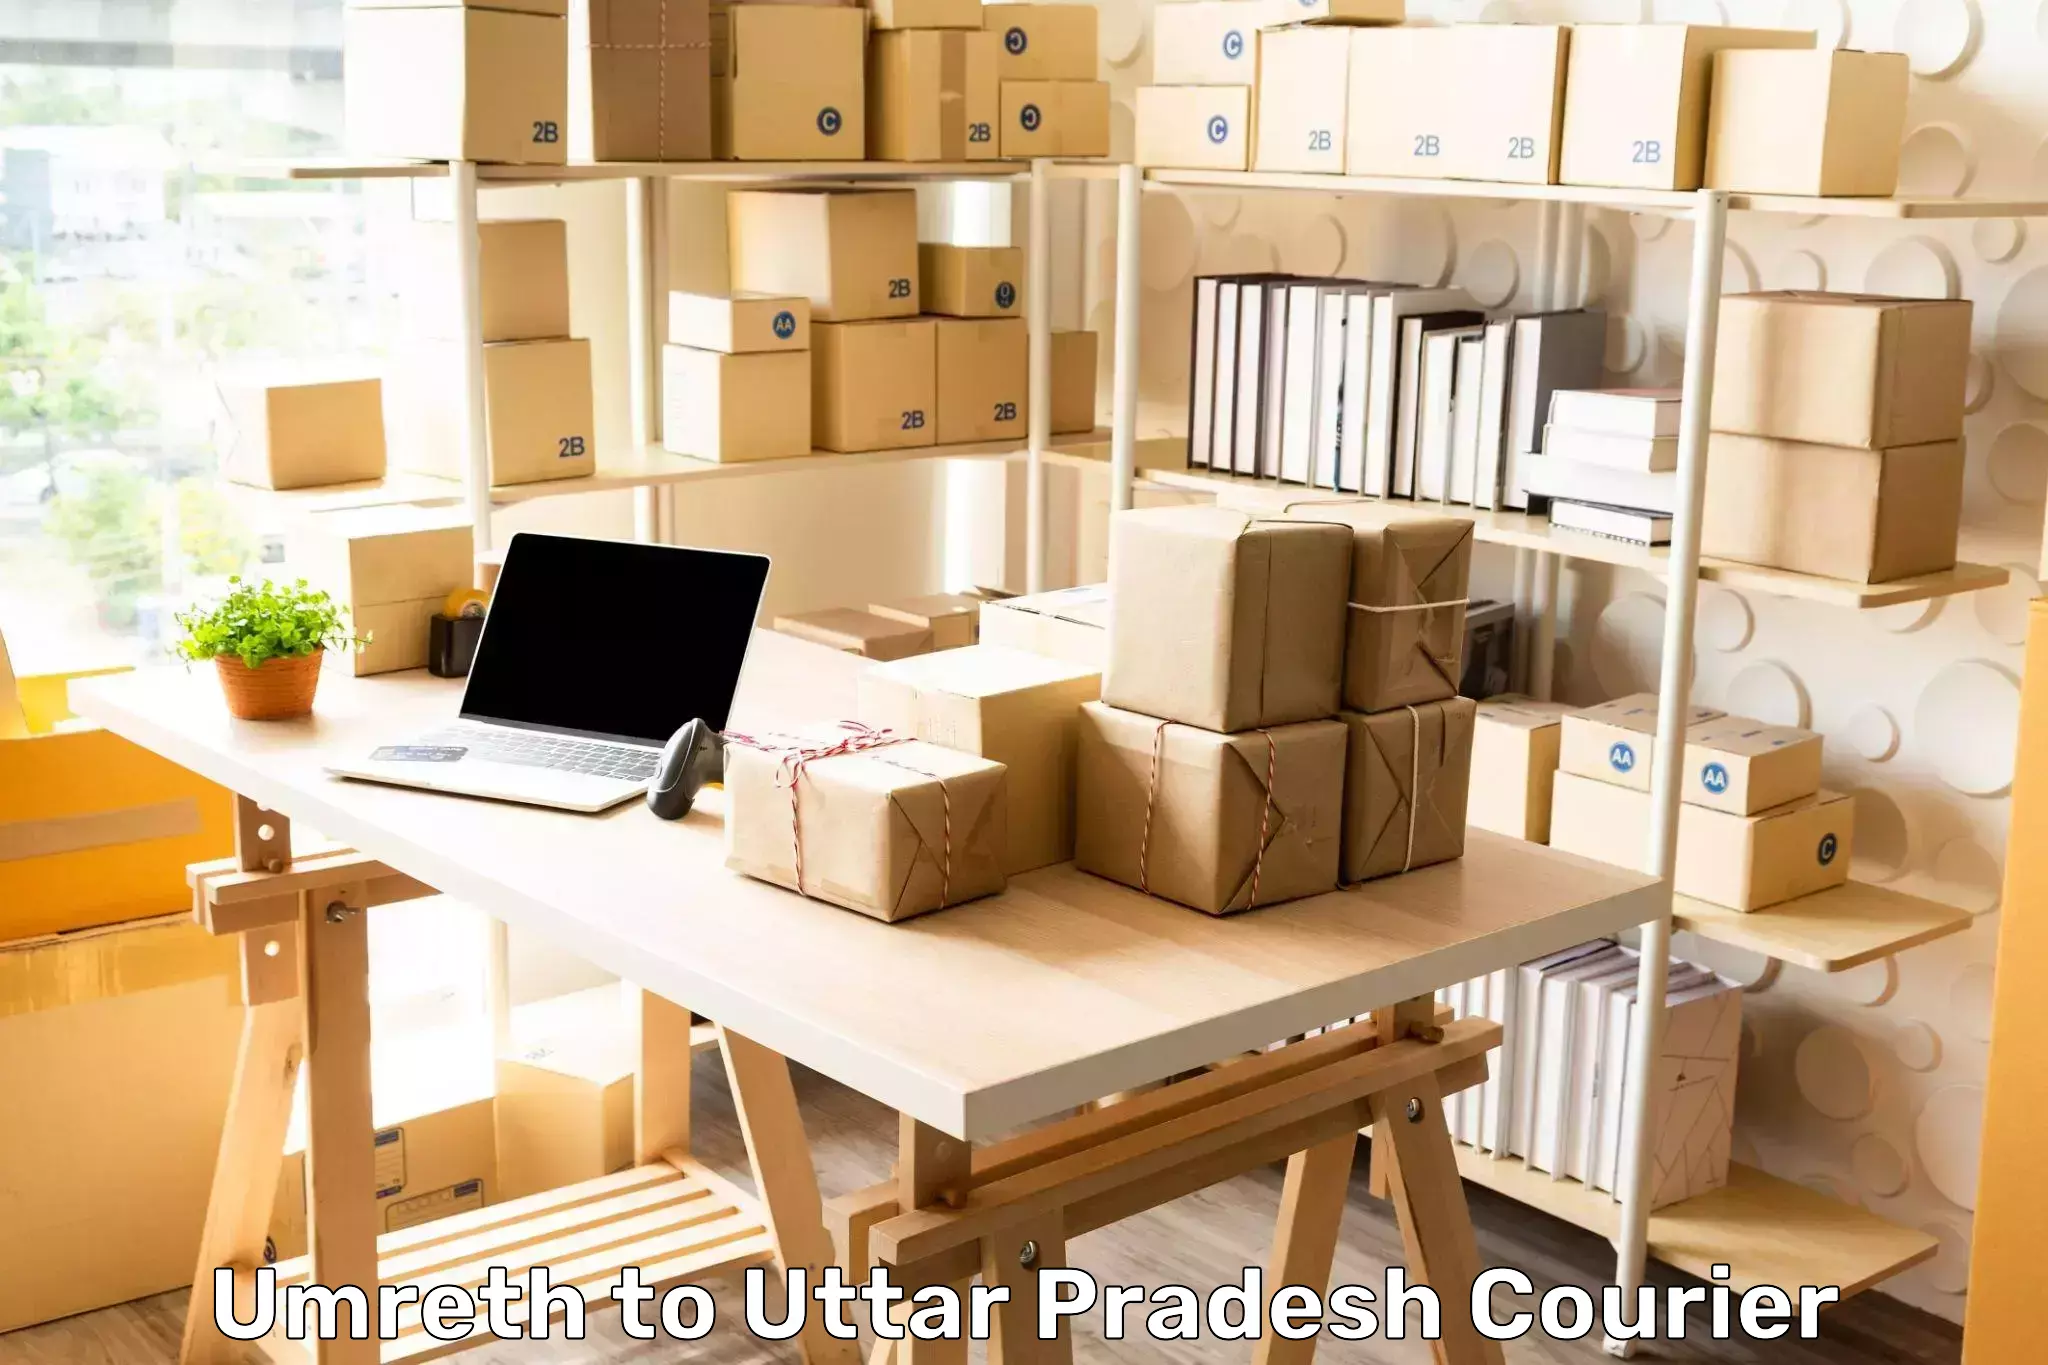 Courier service partnerships in Umreth to Kanpur